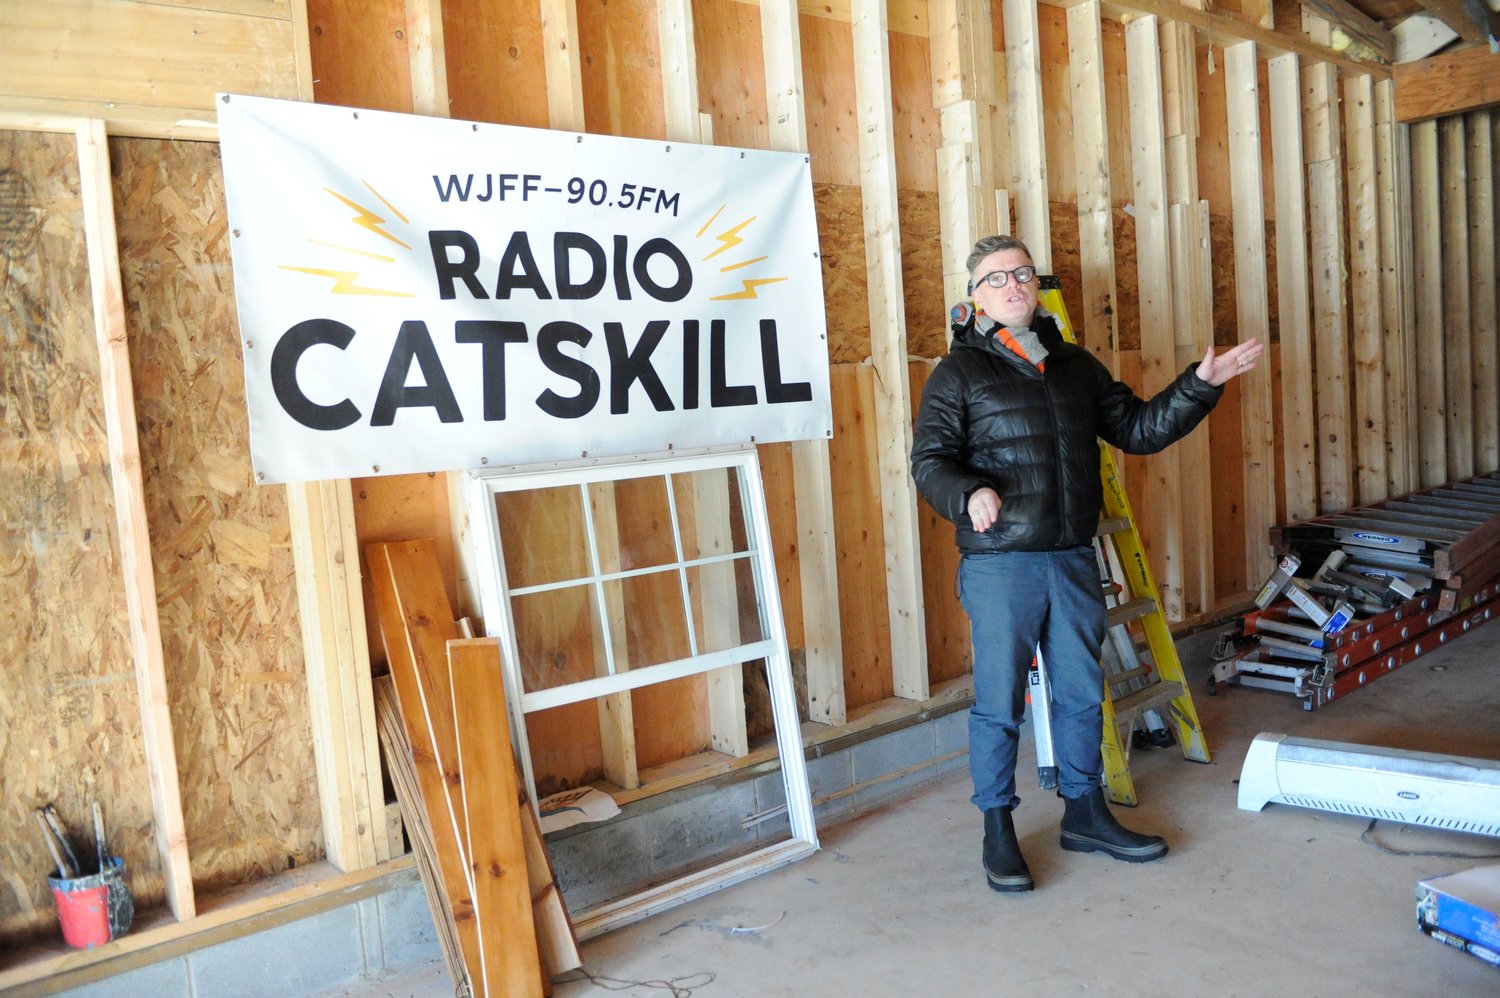 Tim Bruno, Radio Catskill’s general manager, explains that what is now a framed-out empty space will soon be WJFF’s new production studio.